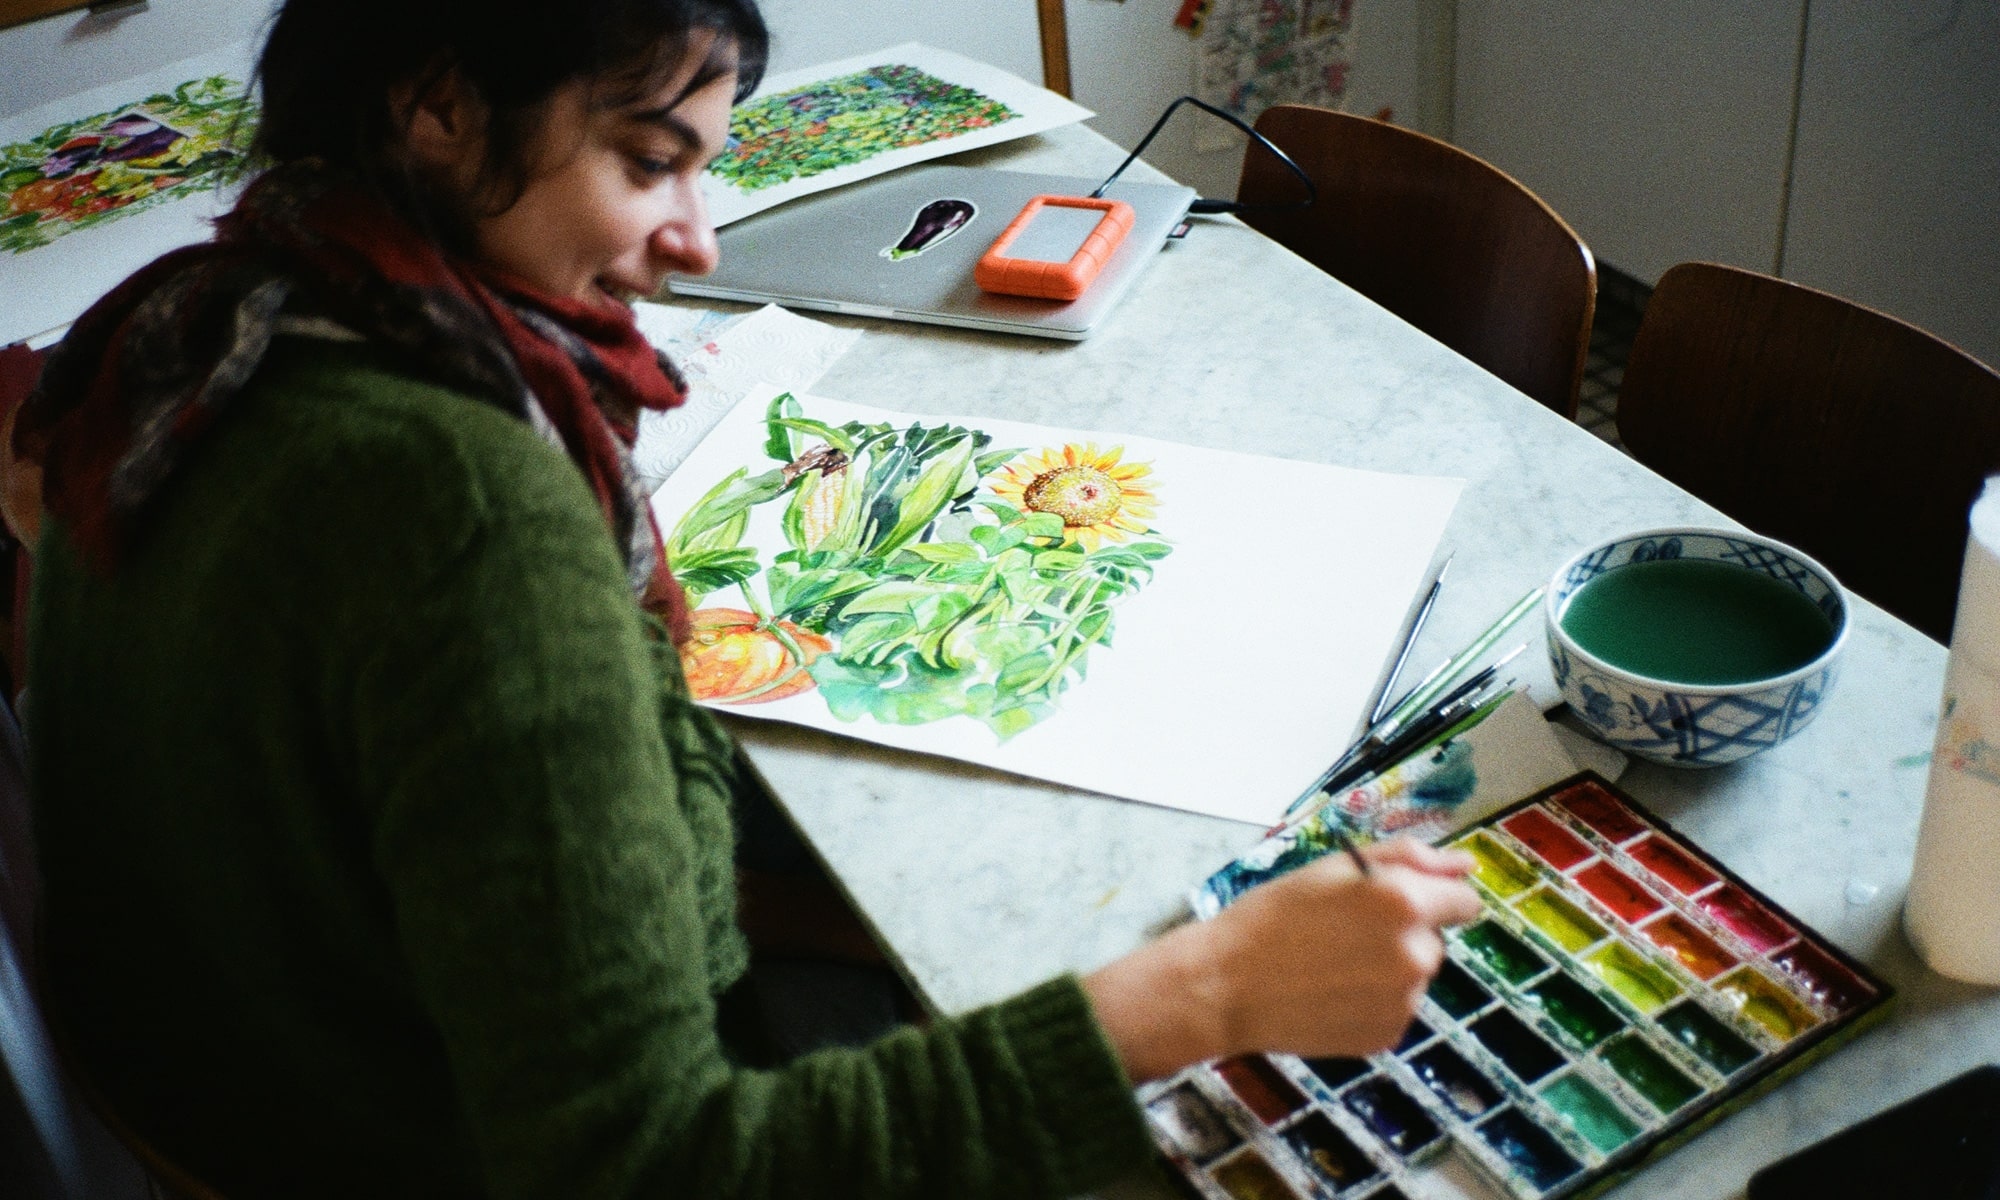 Jessie Kanelos Weiner ’08 painting with watercolors